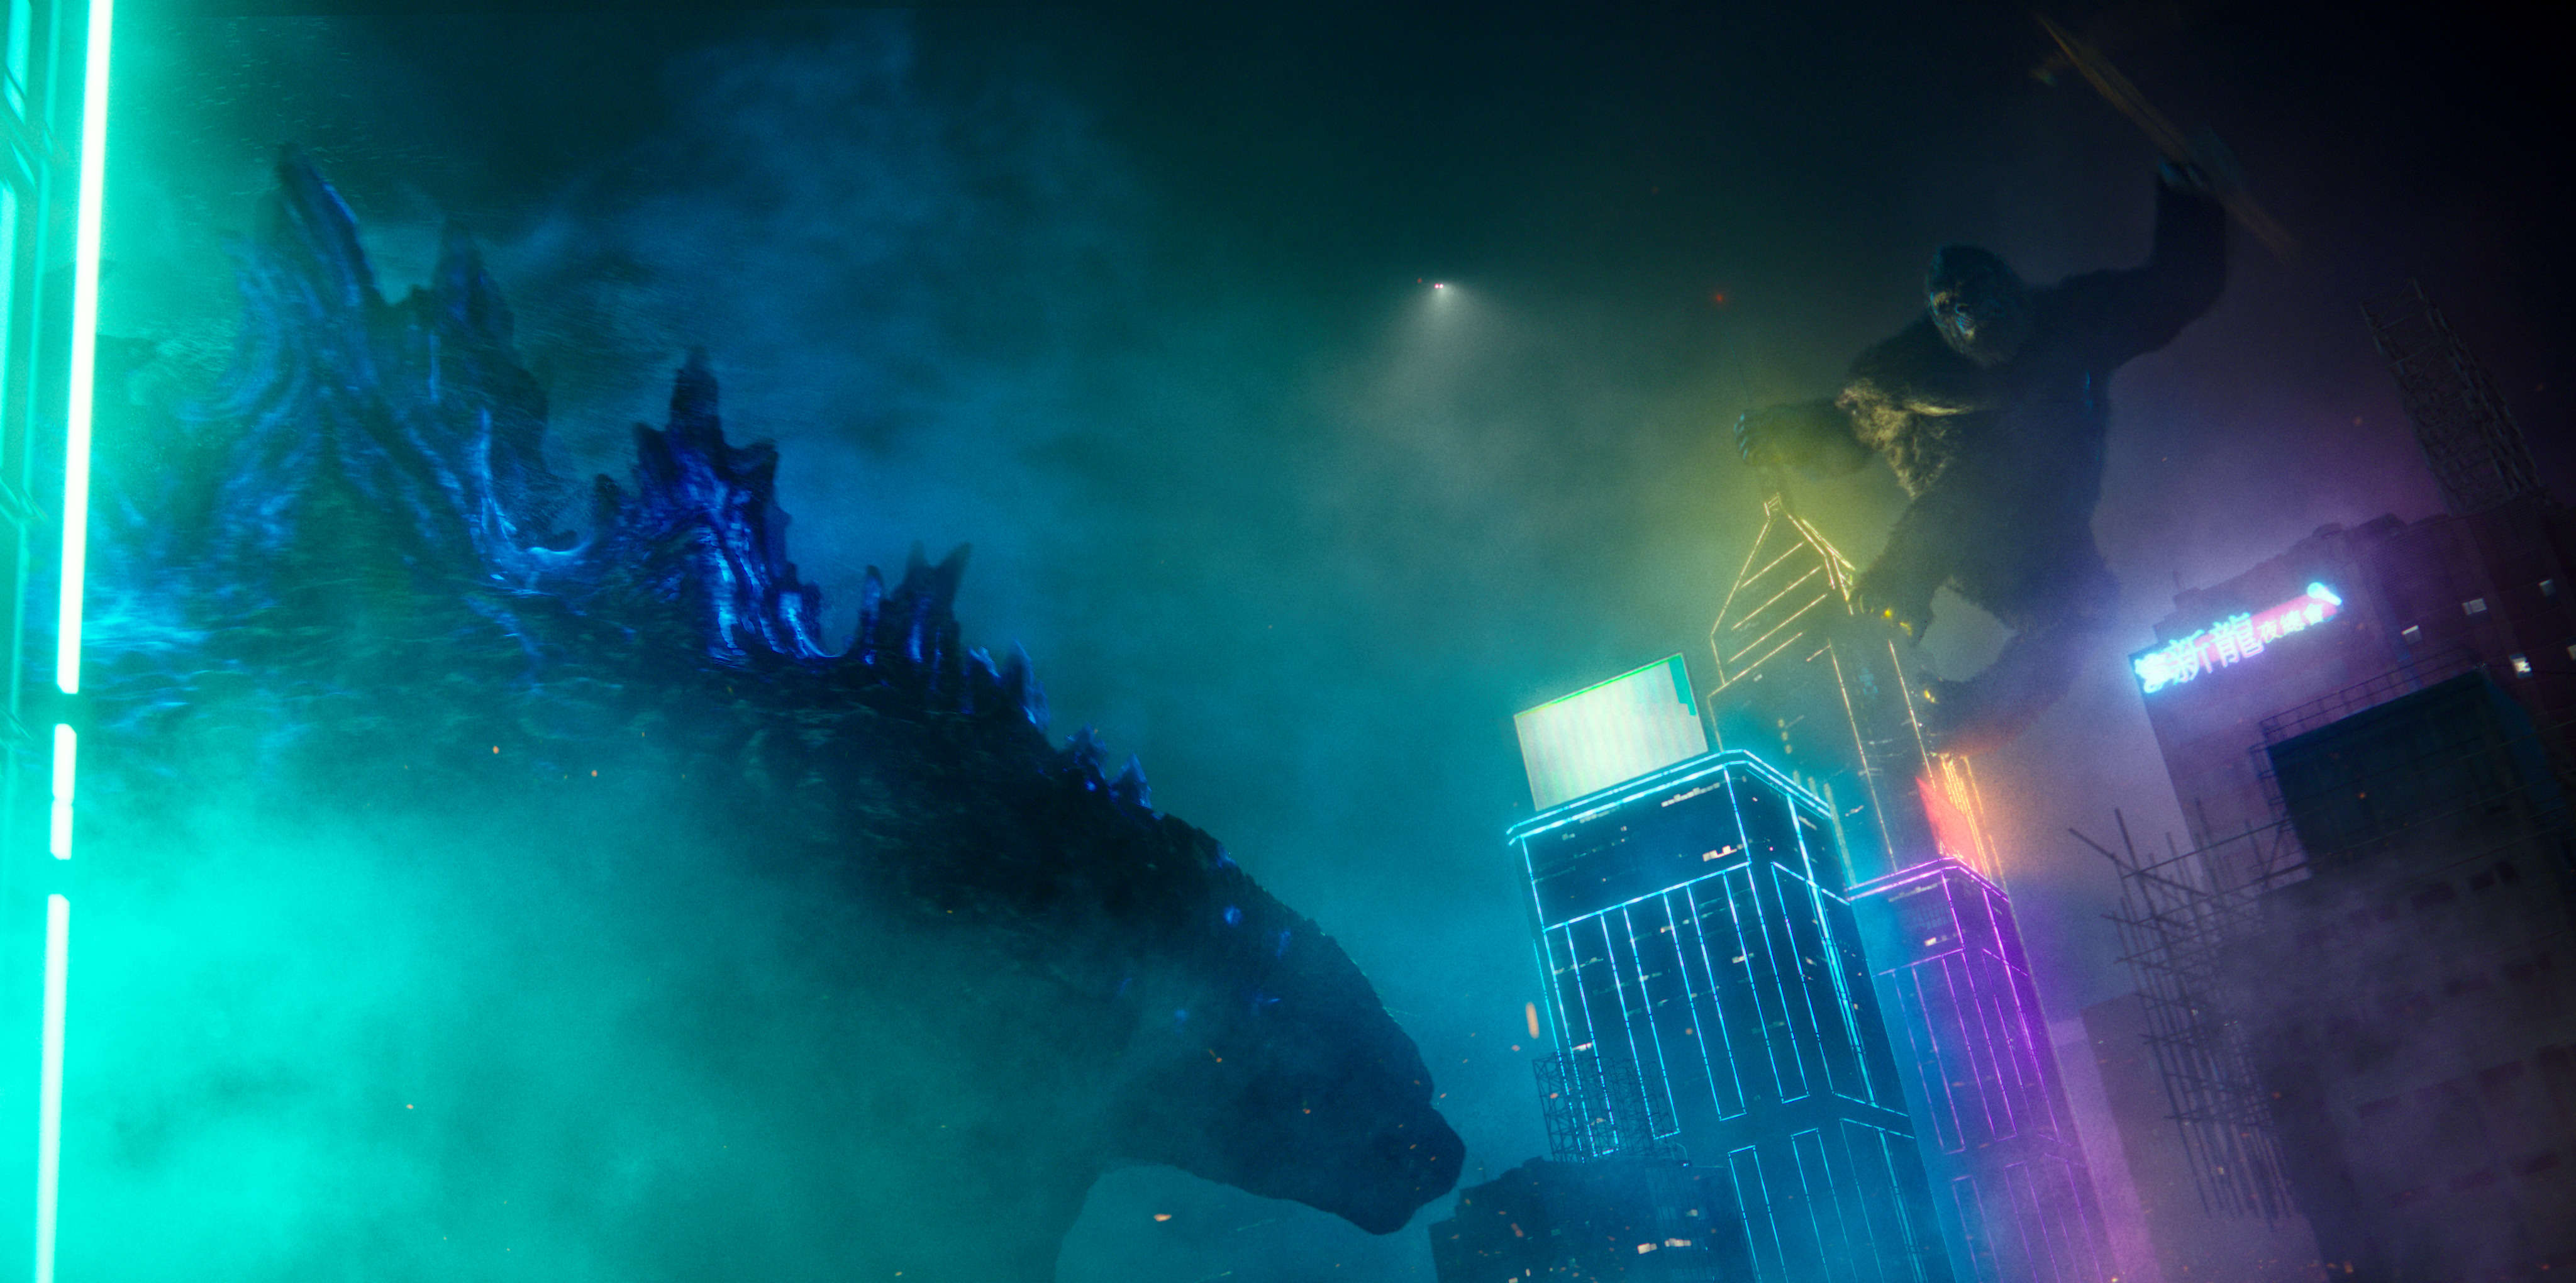 New Godzilla Images Include Size Comparison Chart - IGN